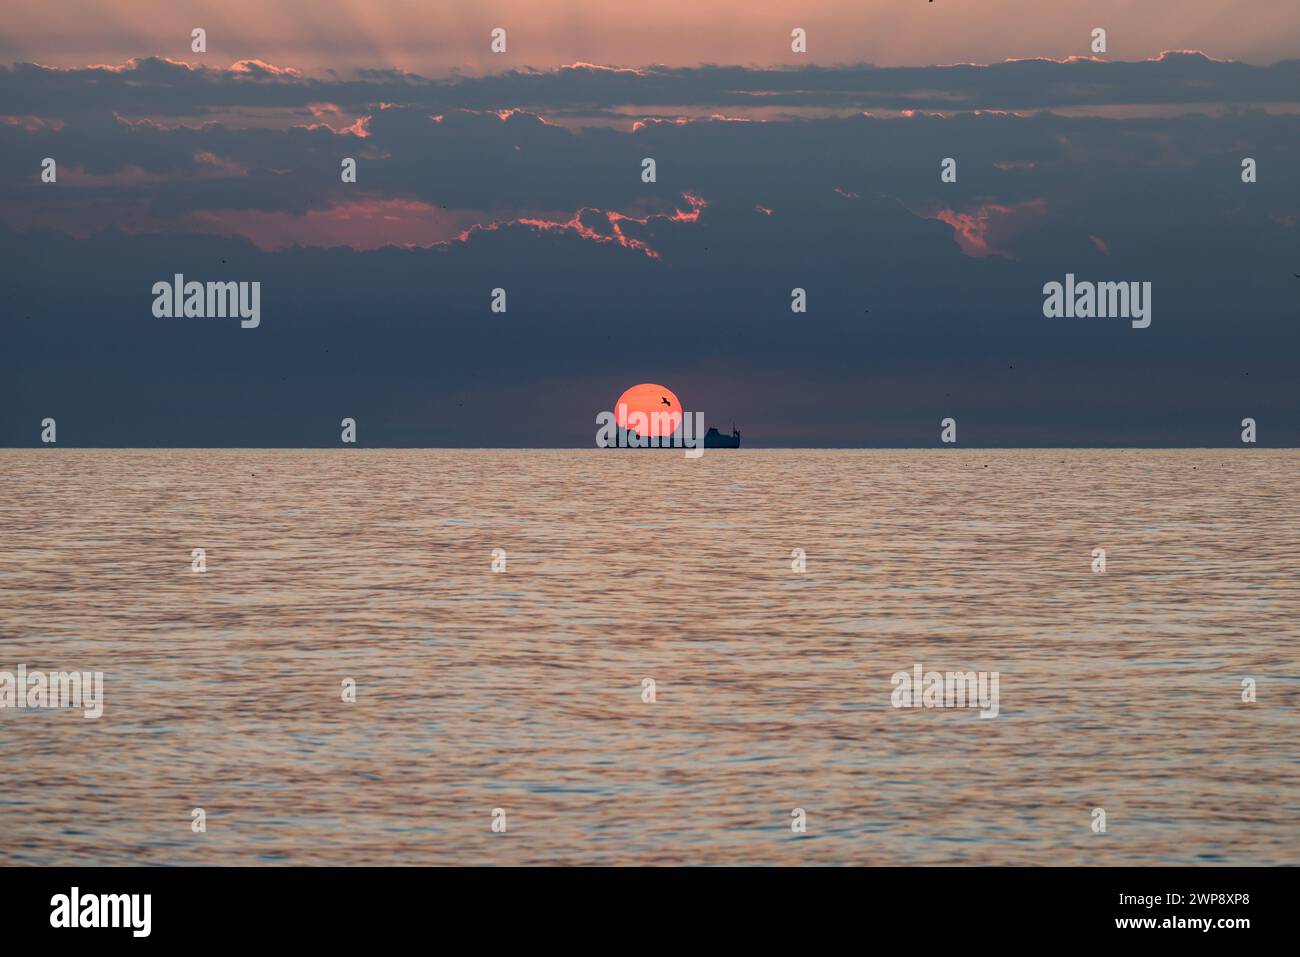 Merchant ship during sunrise over the Mediterranean Sea seen from the beach in Torremolinos. Costa del Sol, Spain Stock Photo